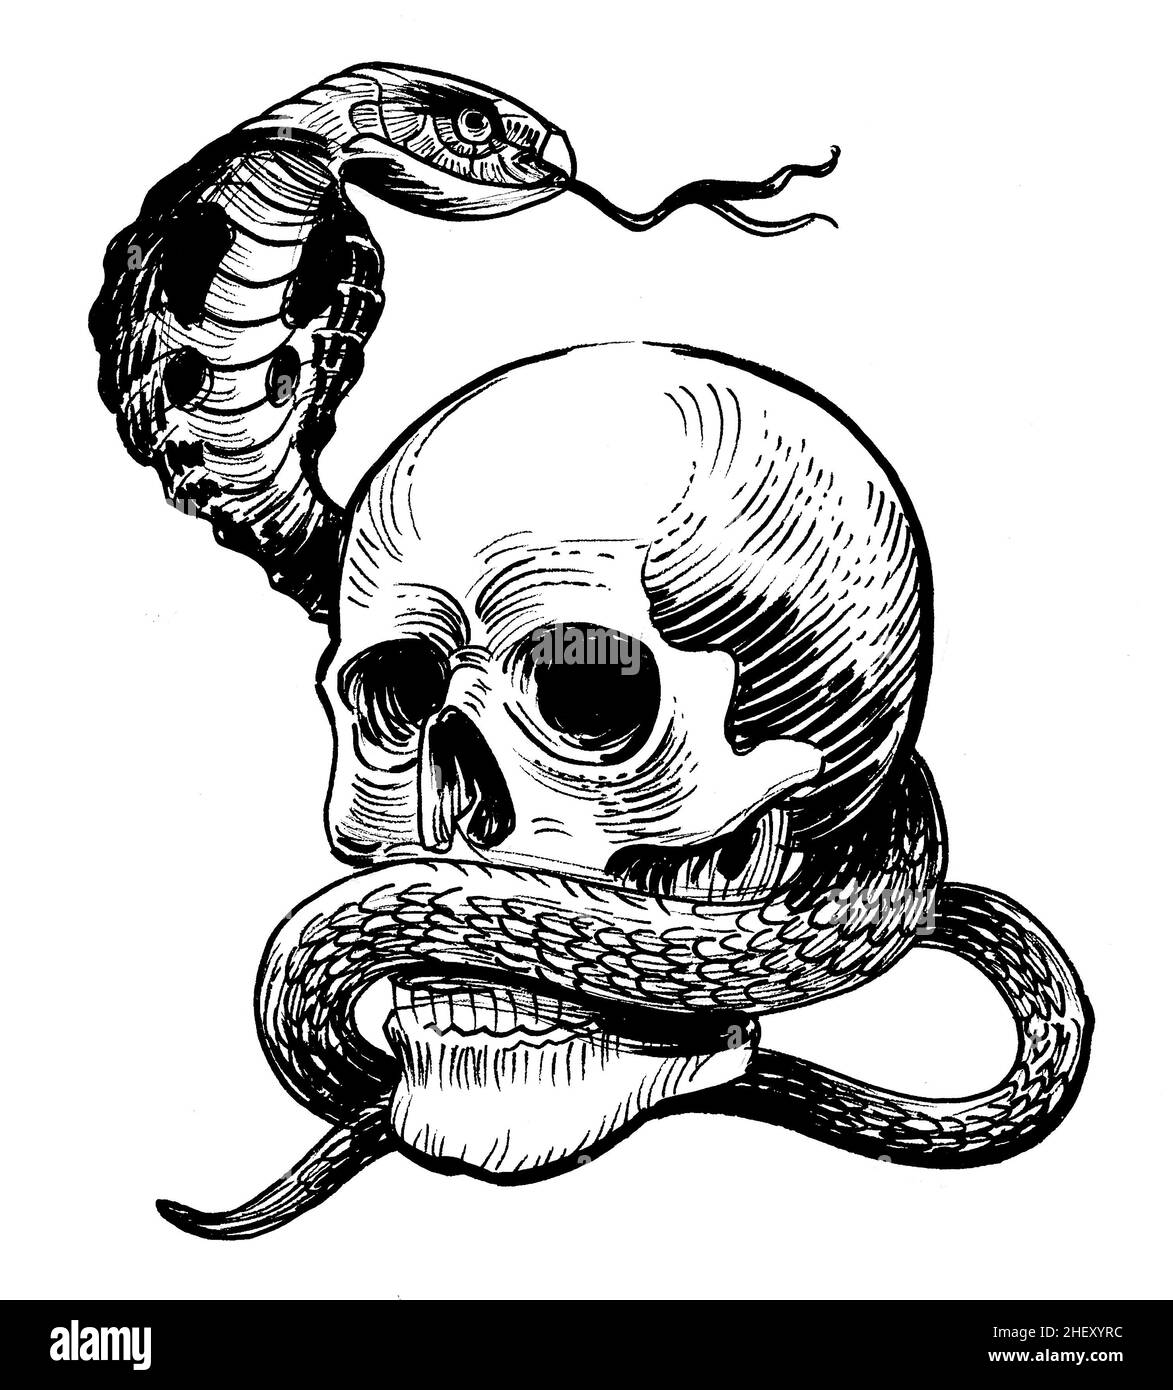 Human skull and cobra snake. Ink black and white drawing Stock ...